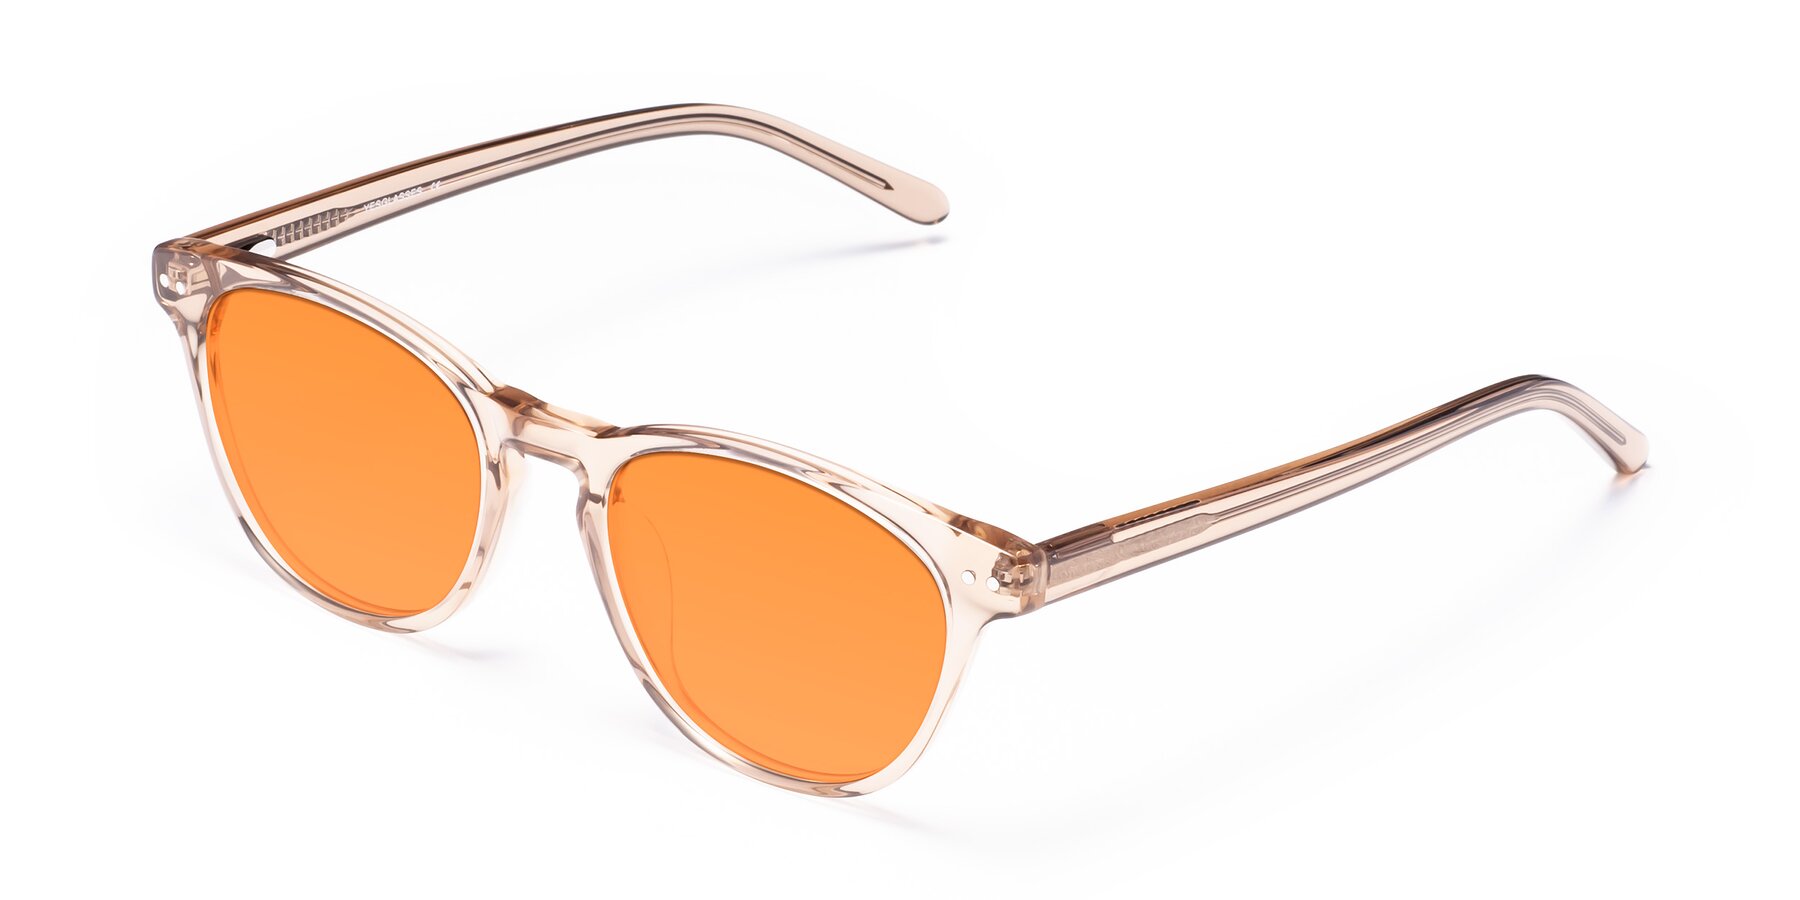 Angle of Blaze in light Brown with Orange Tinted Lenses